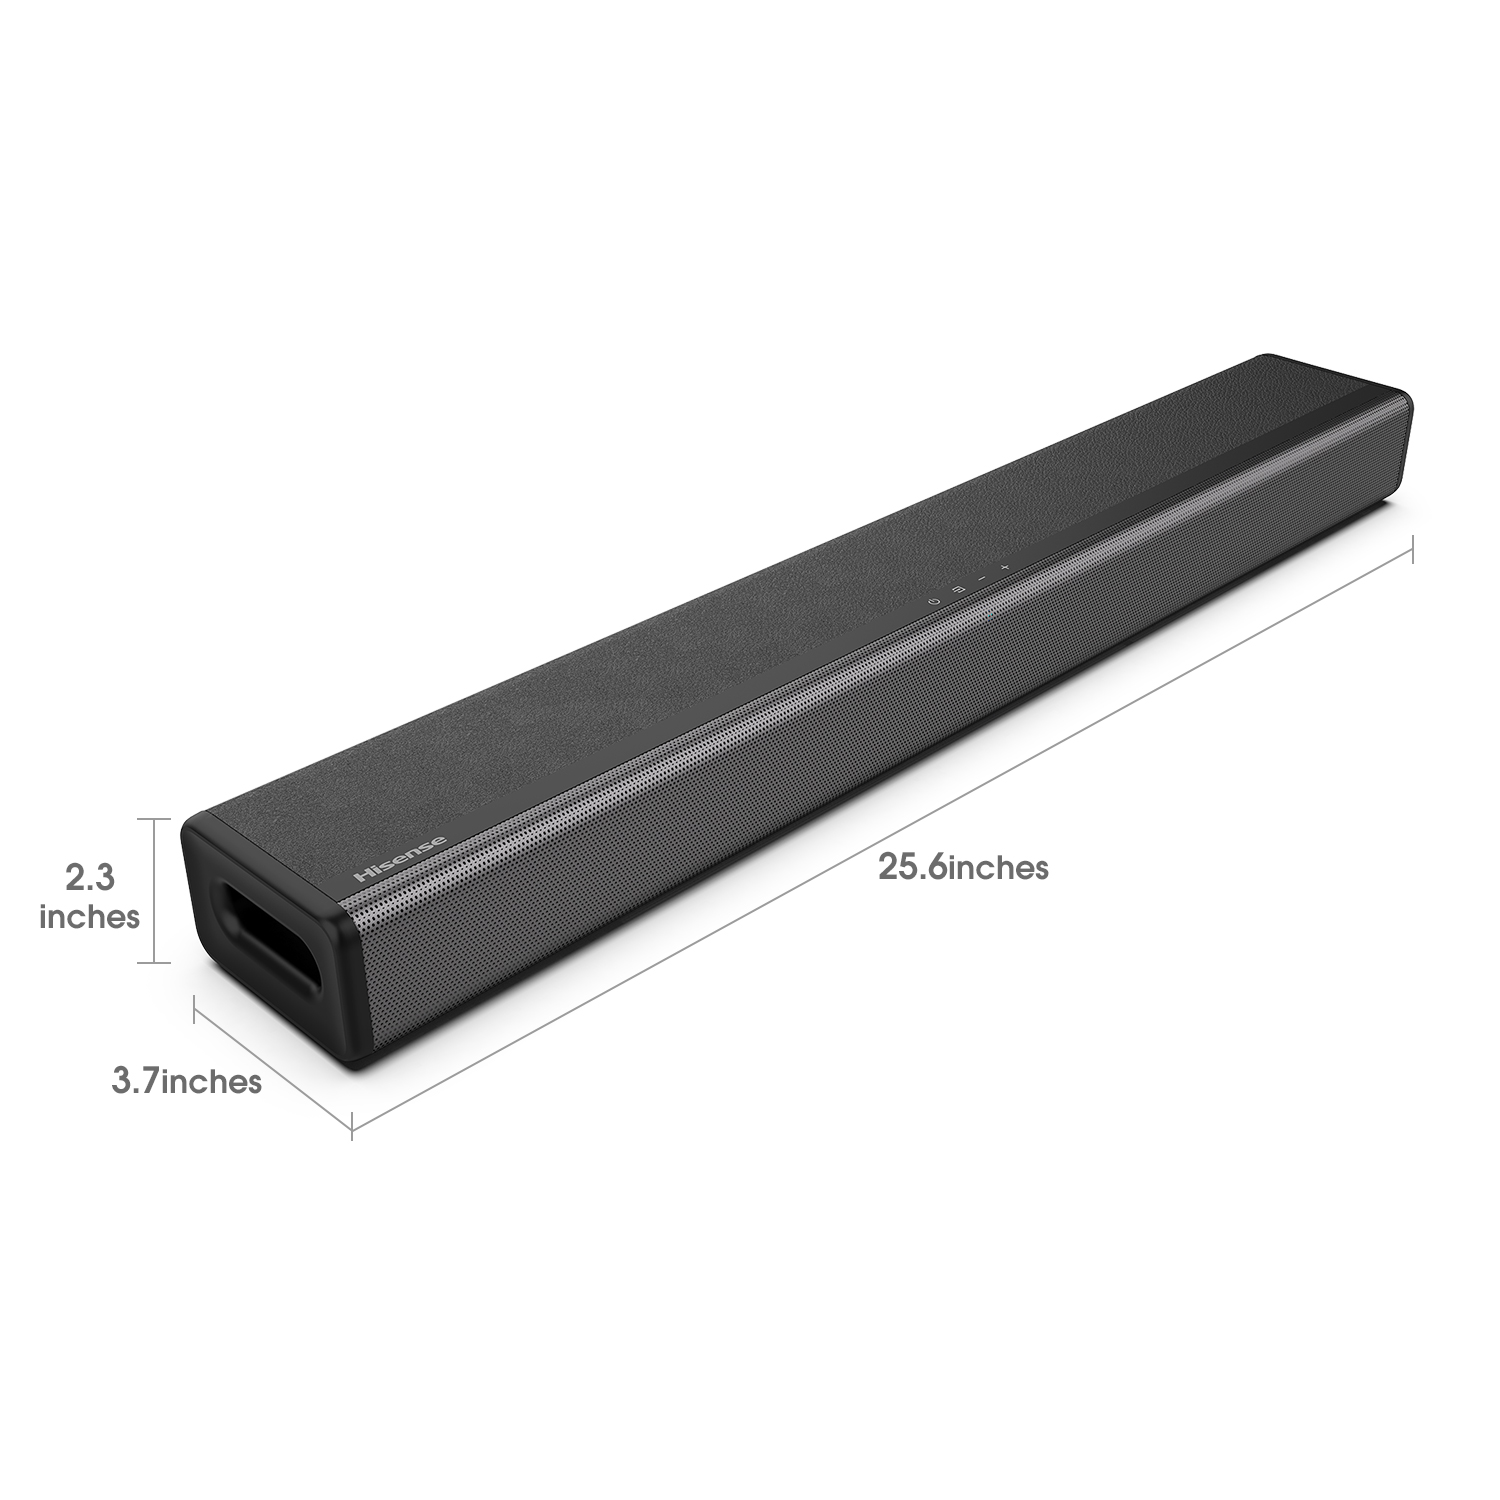 Hisense HS214 2.1 Channel Sound Bar with Built-in Subwoofer - image 4 of 15